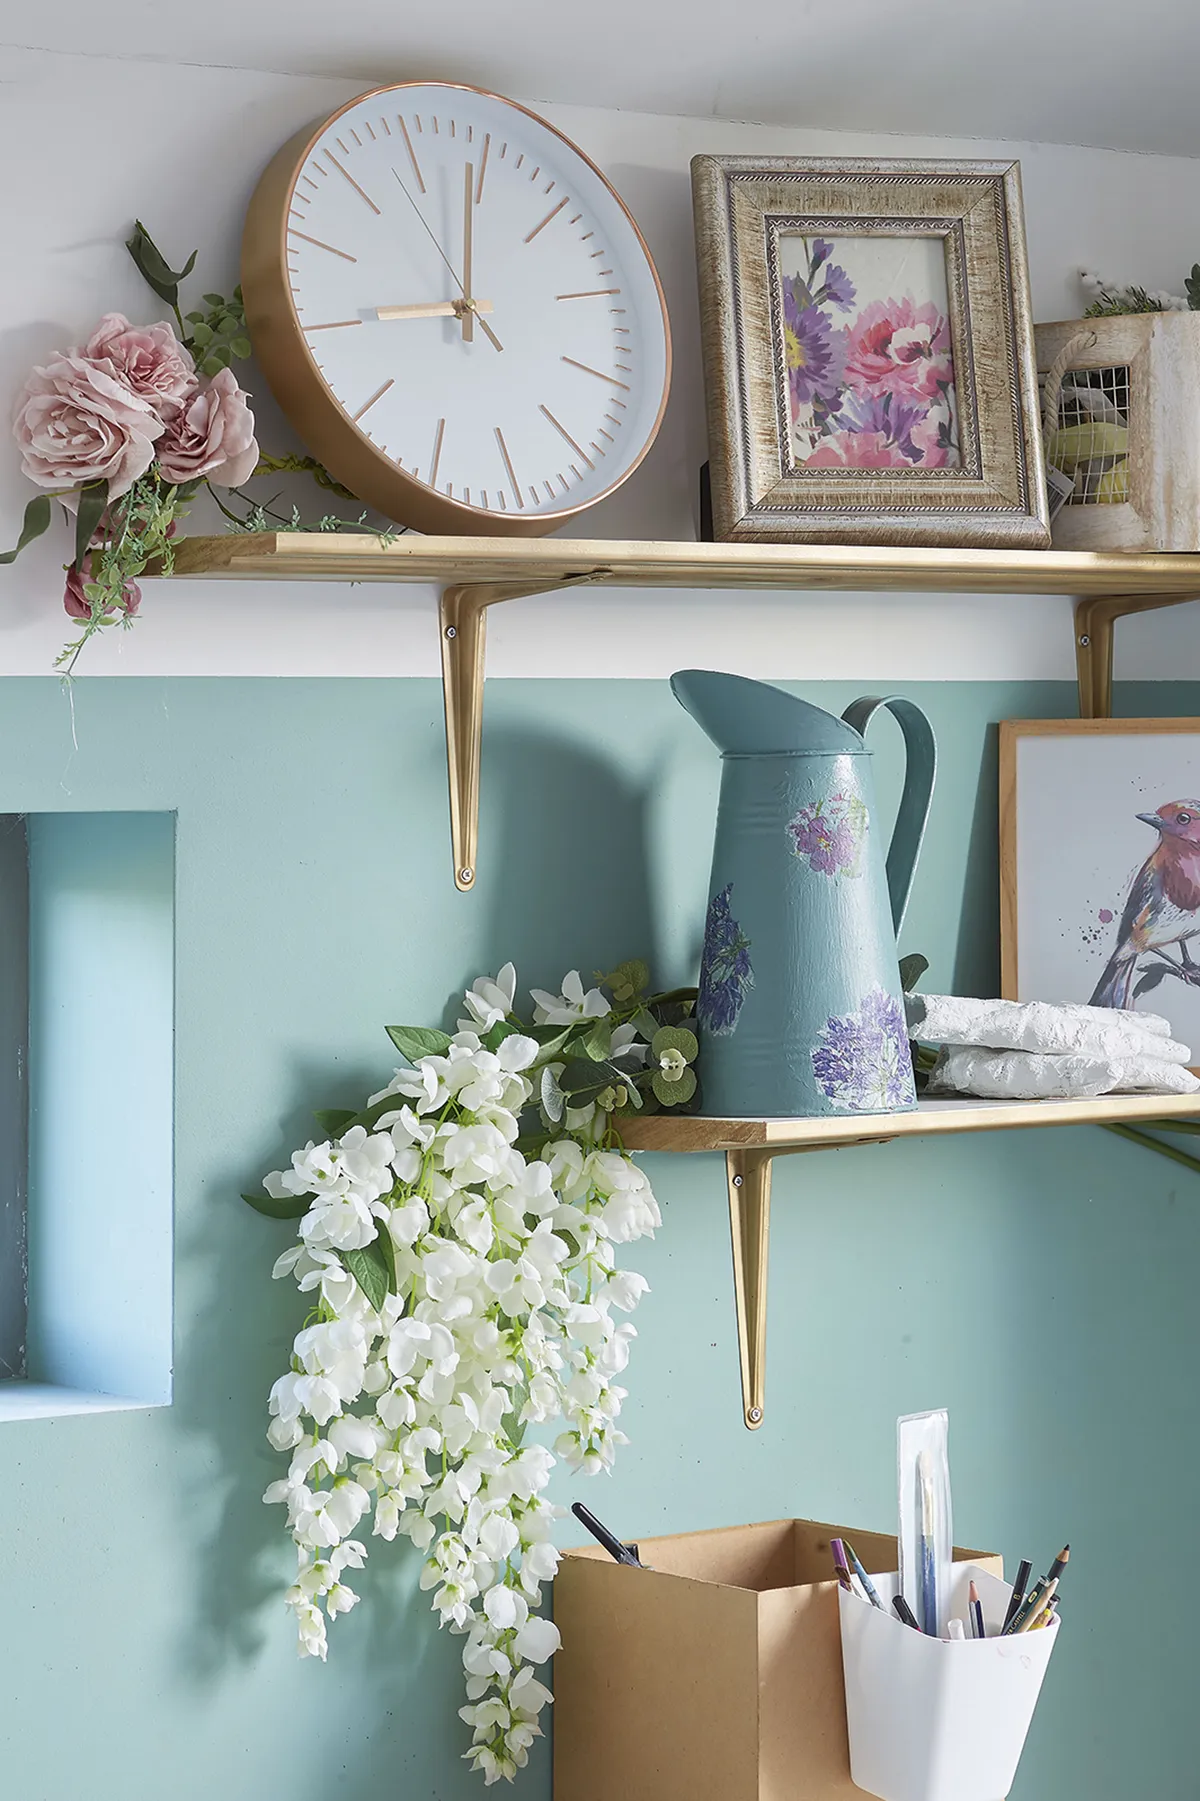 As the house is built on a farm plot, Gillian pays homage to farmhouse living with country chic accessories like this sweet metal jug adorned with flower motifs